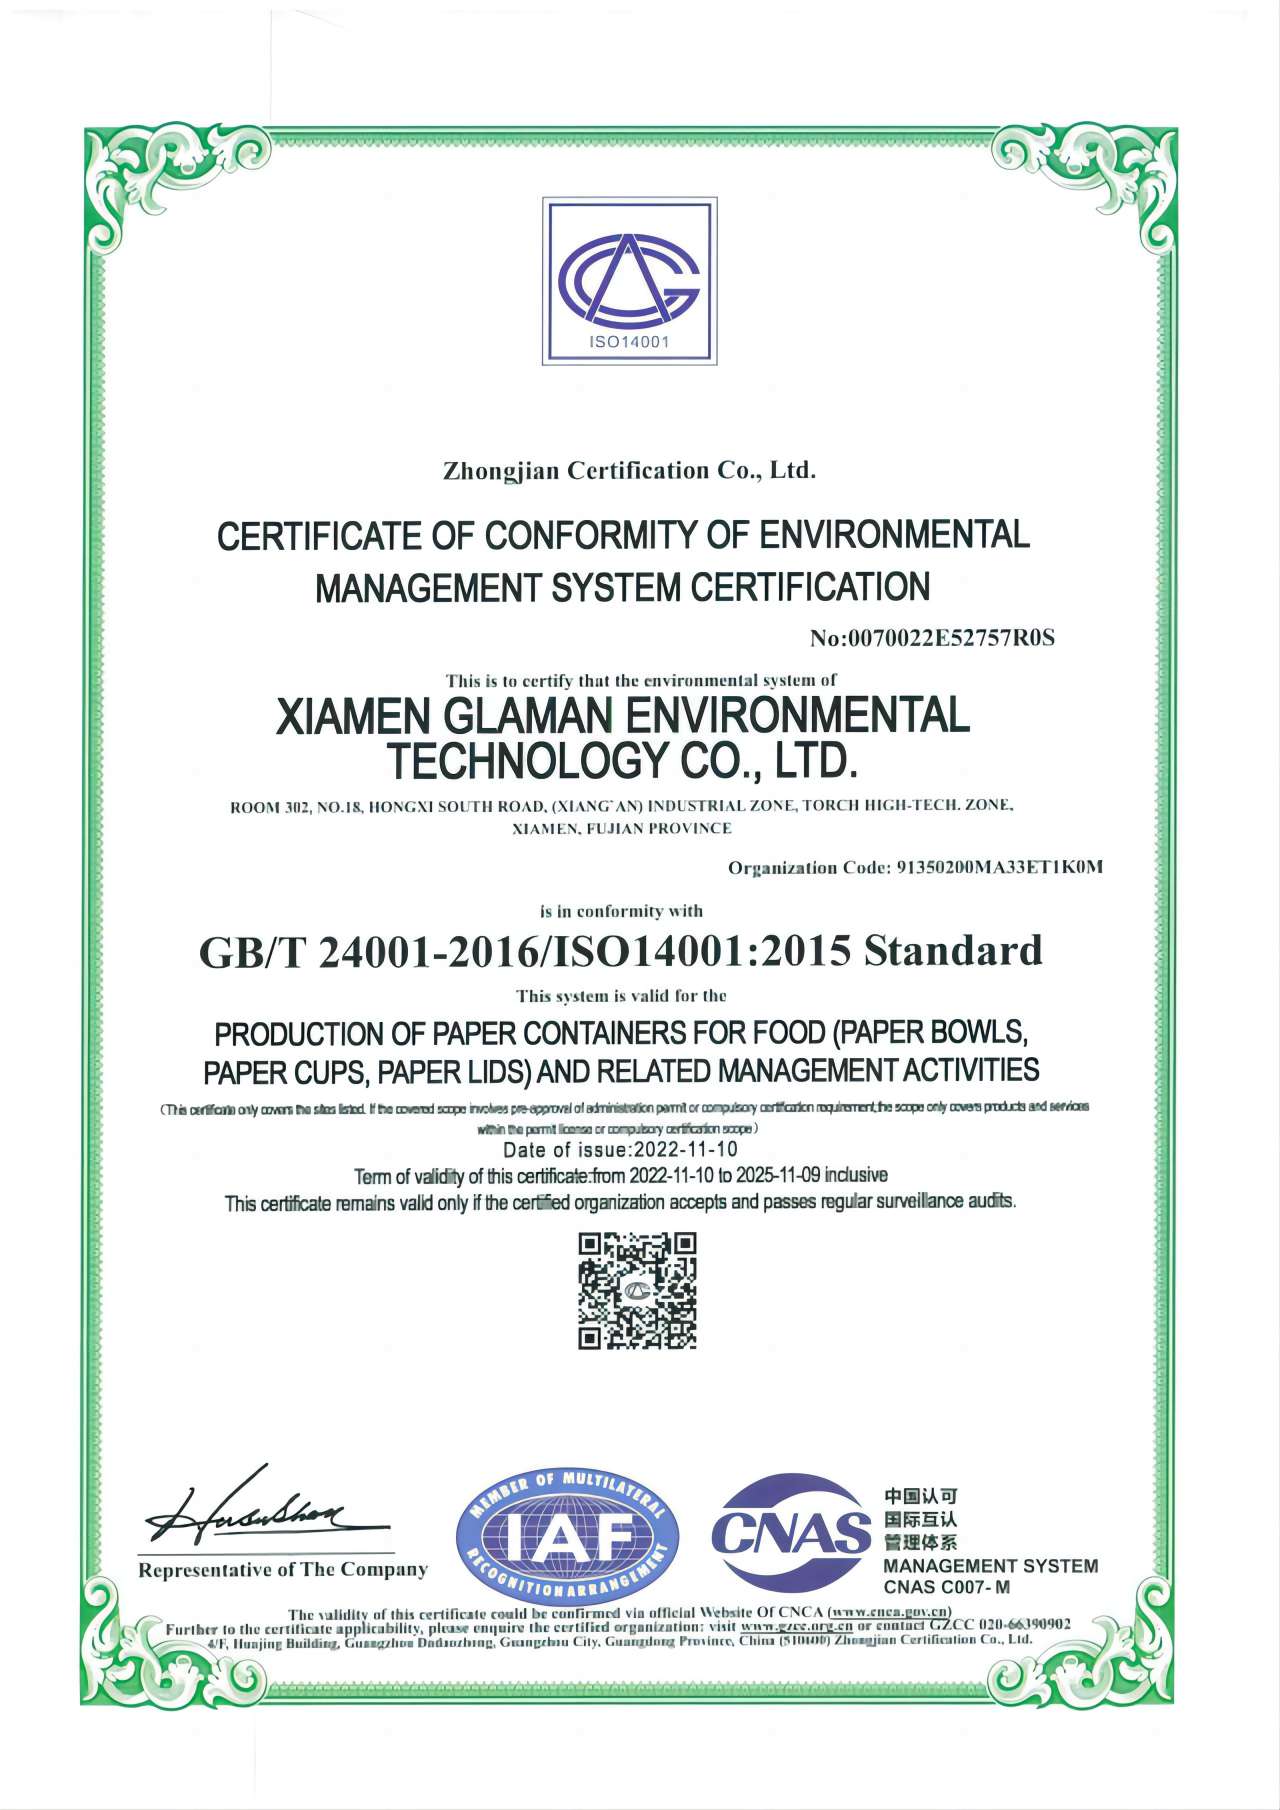 The certification of ISO14001